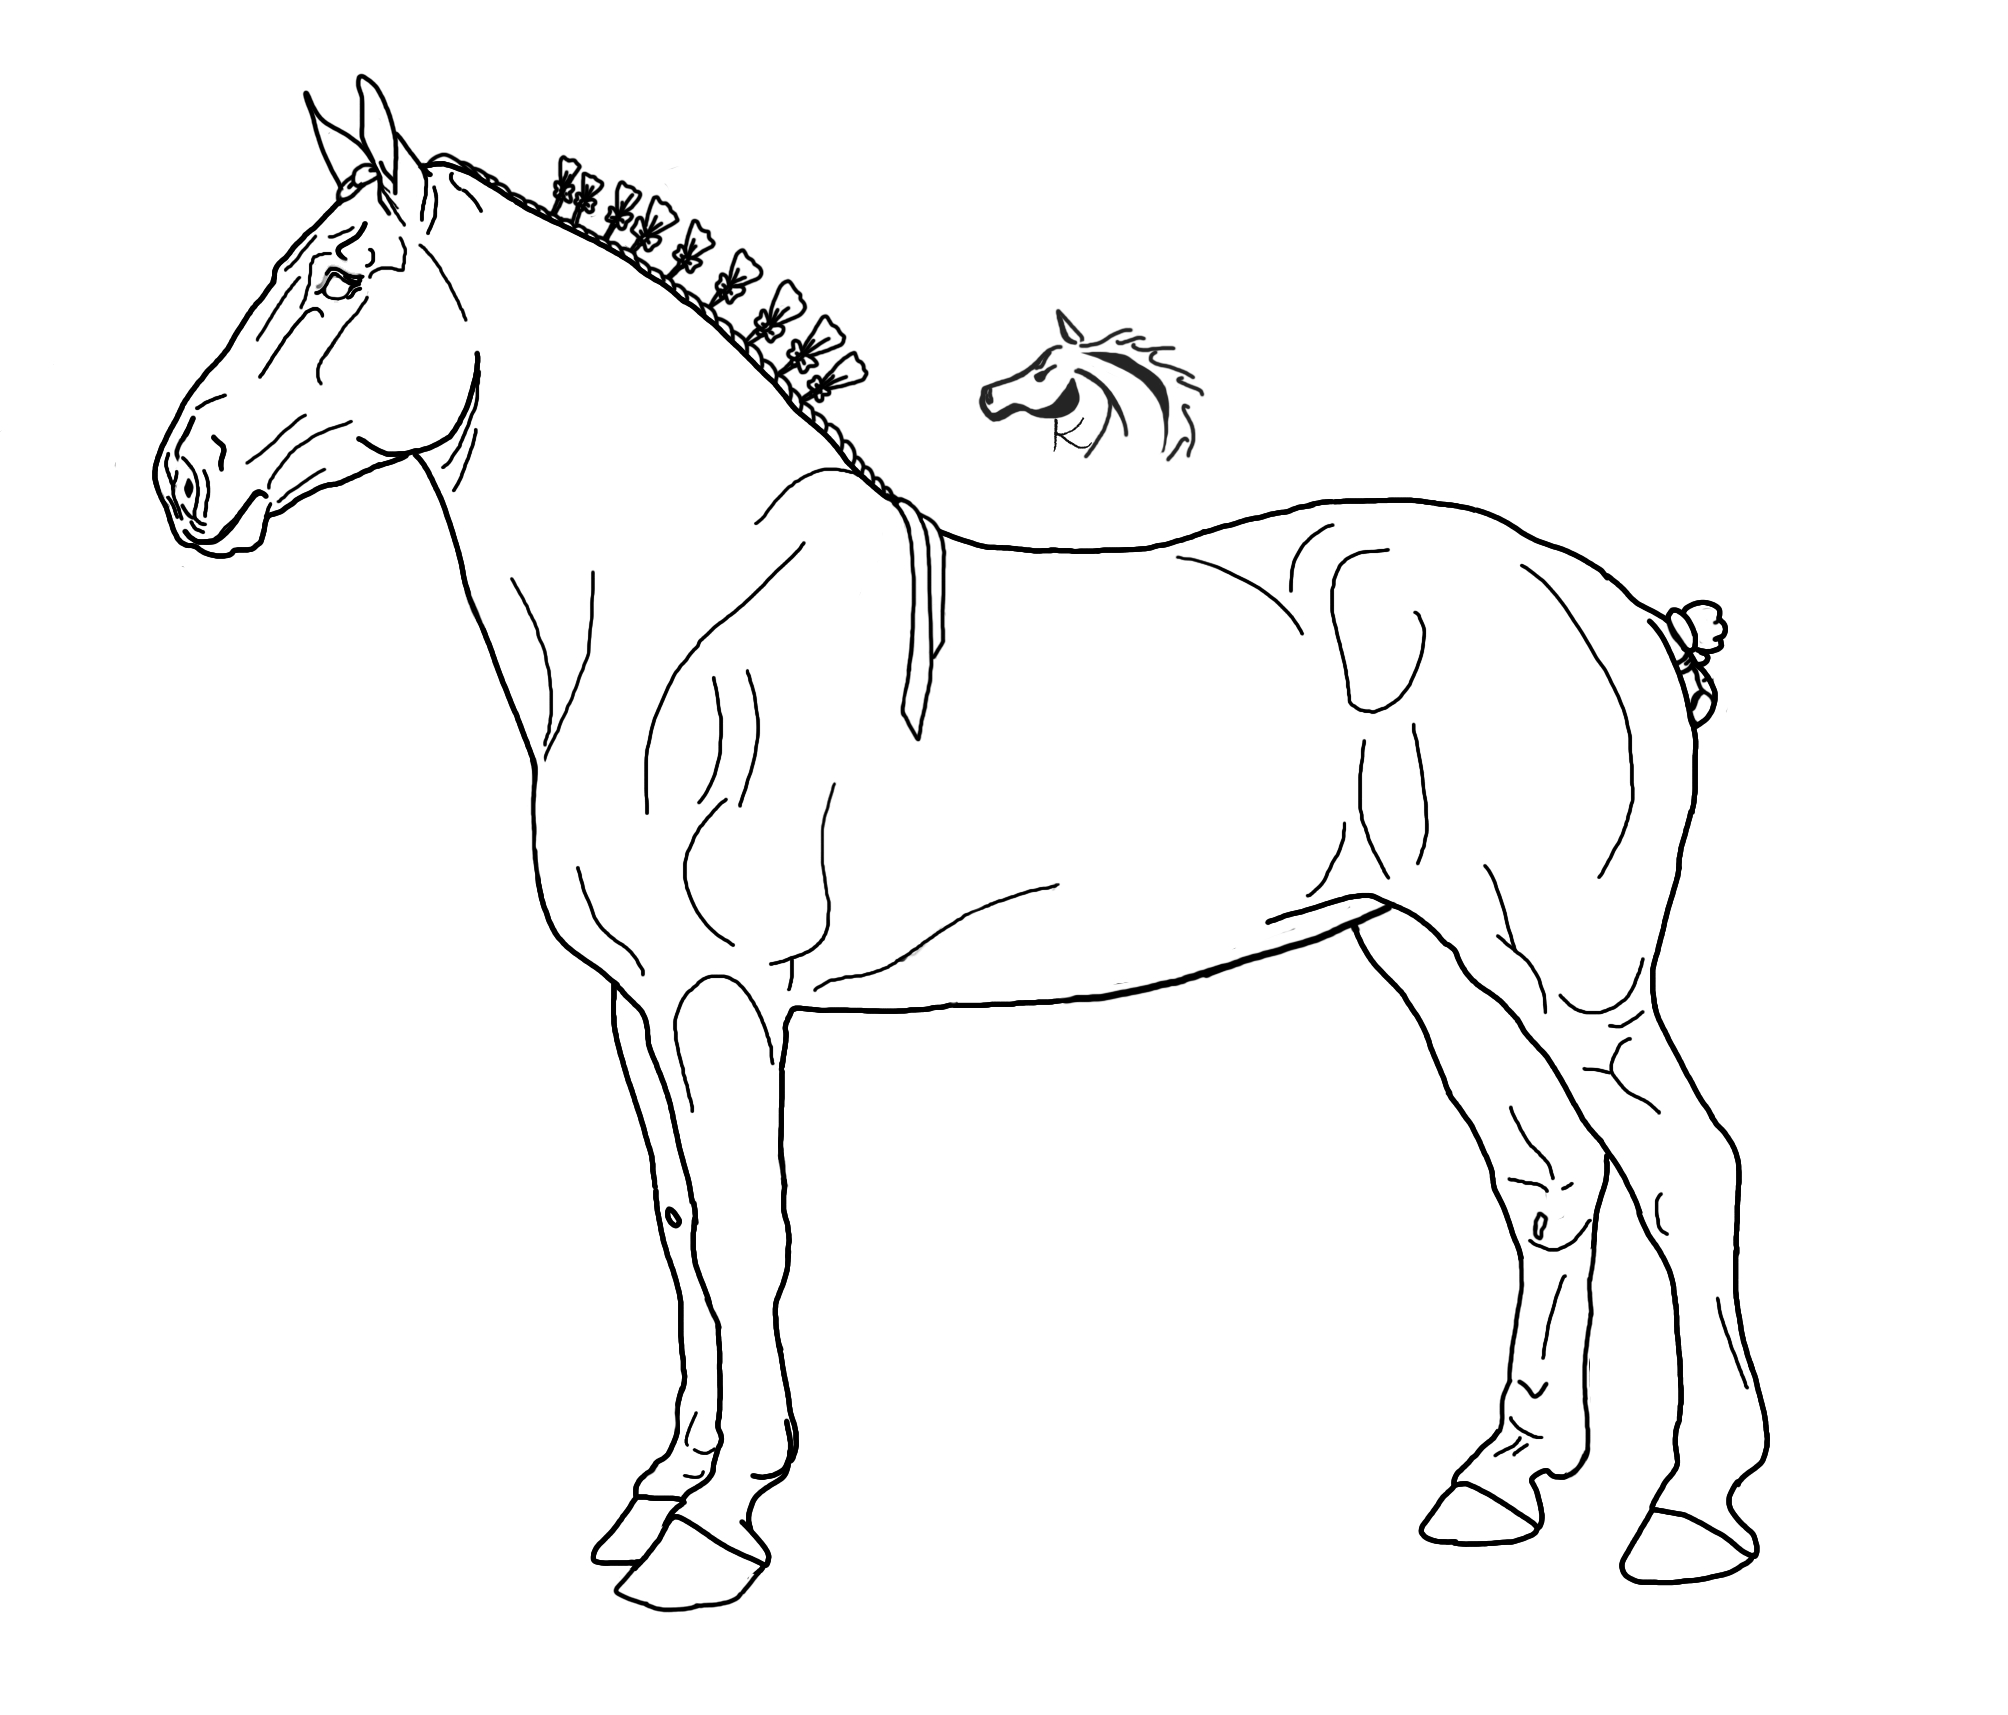 Draught Horse coloring #1, Download drawings